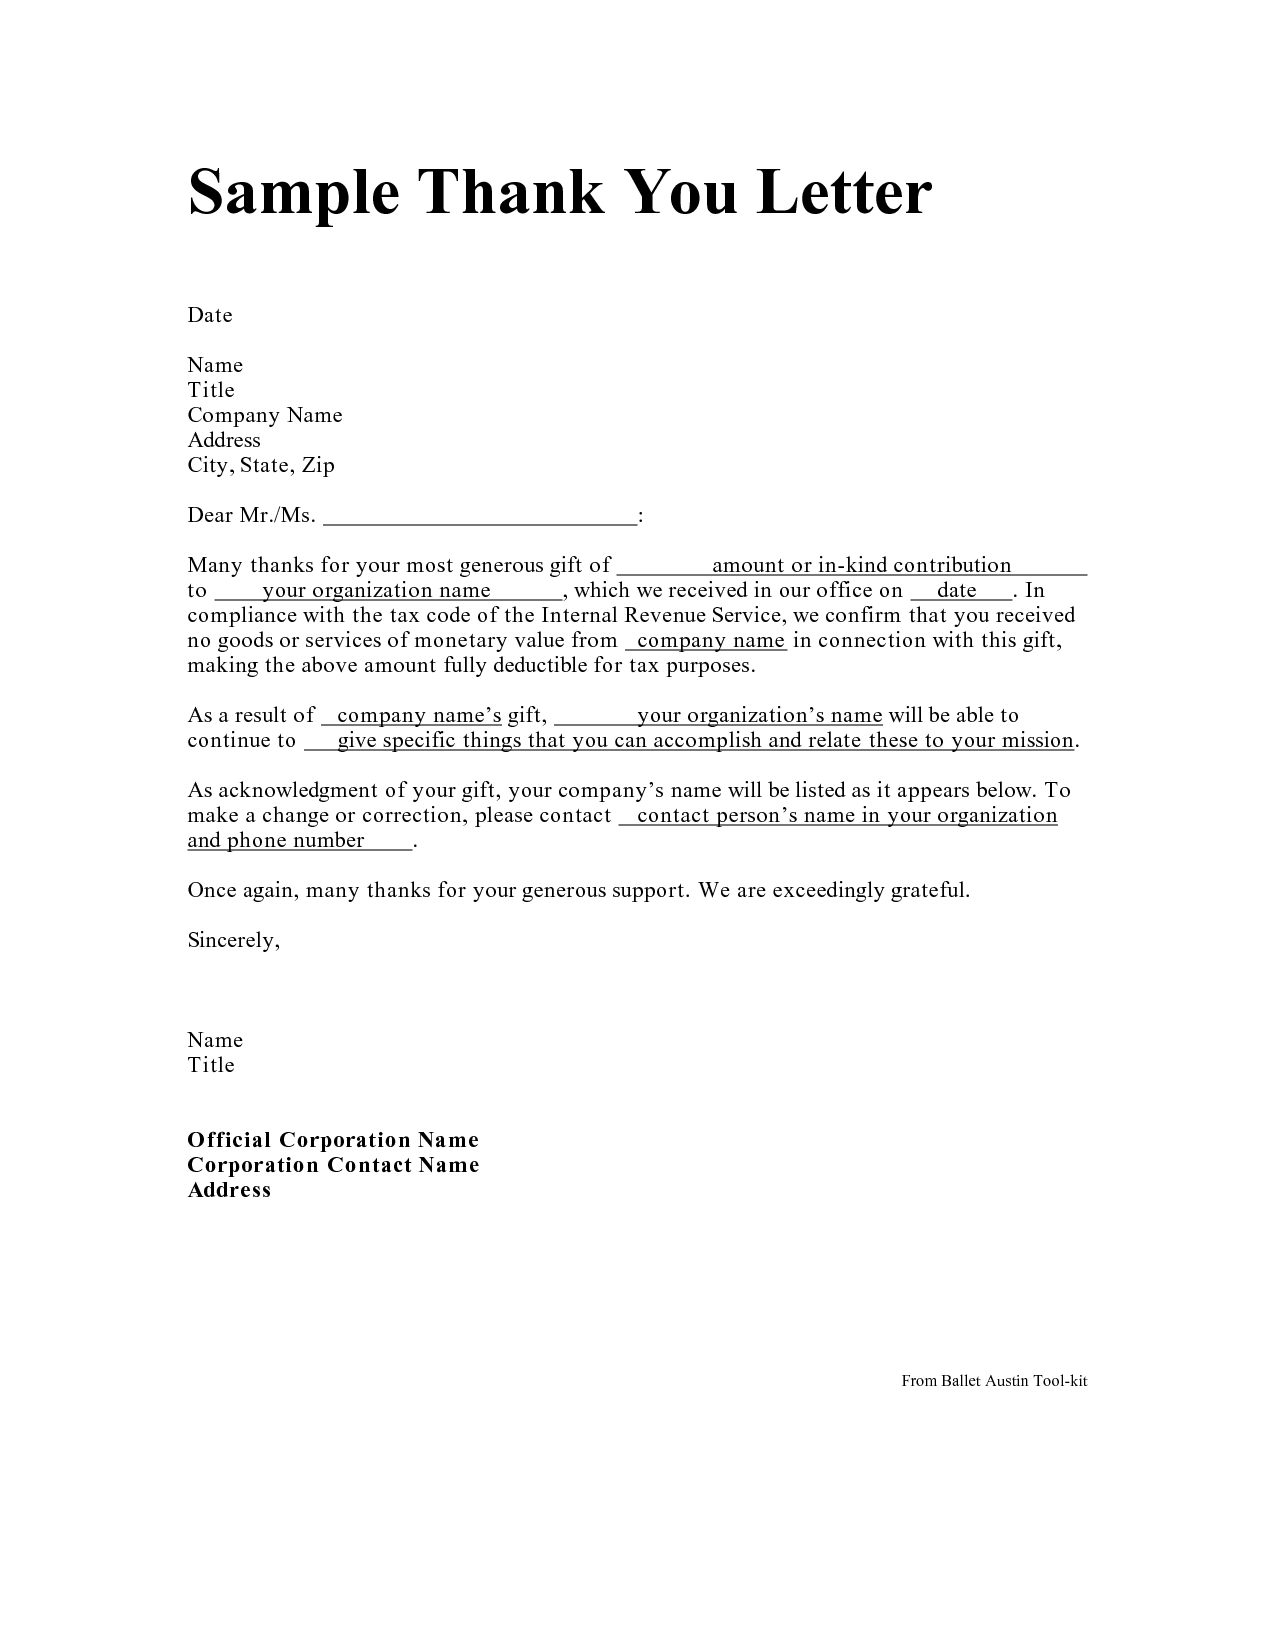 Sample Proof Of Funds Letter Template - Personal Thank You Letter Personal Thank You Letter Samples